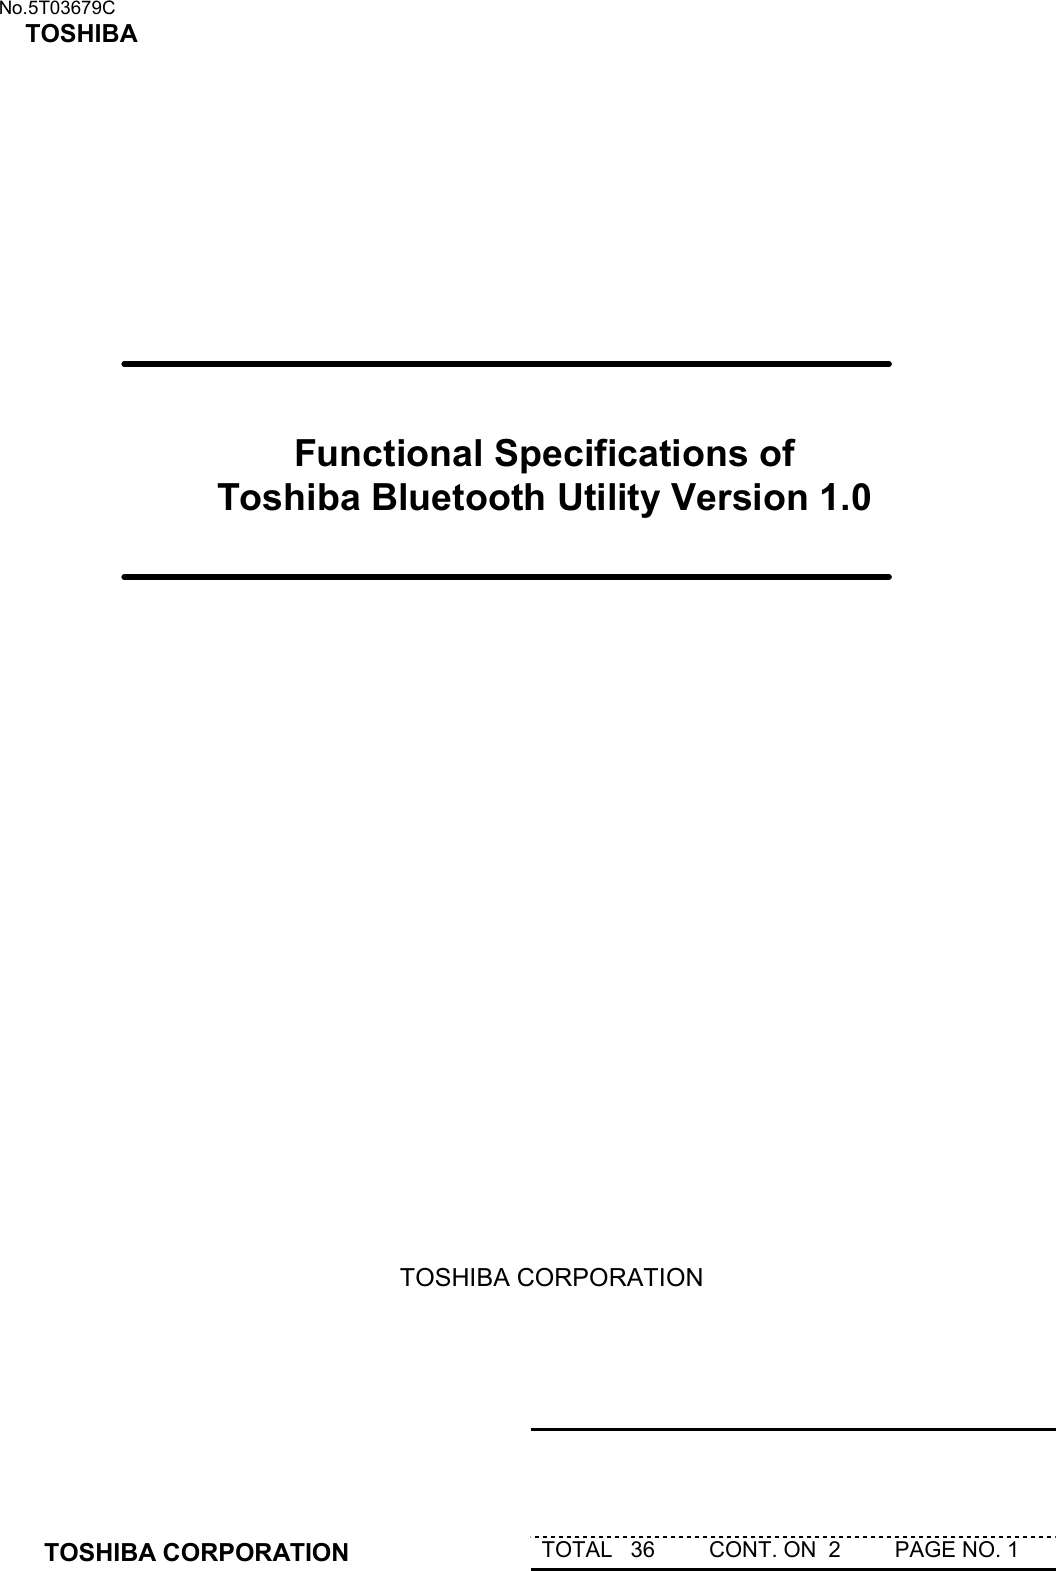   No.5T03679C TOSHIBA   TOSHIBA CORPORATION  TOTAL   36         CONT. ON  2         PAGE NO. 1                           Functional Specifications of Toshiba Bluetooth Utility Version 1.0                                       TOSHIBA CORPORATION  